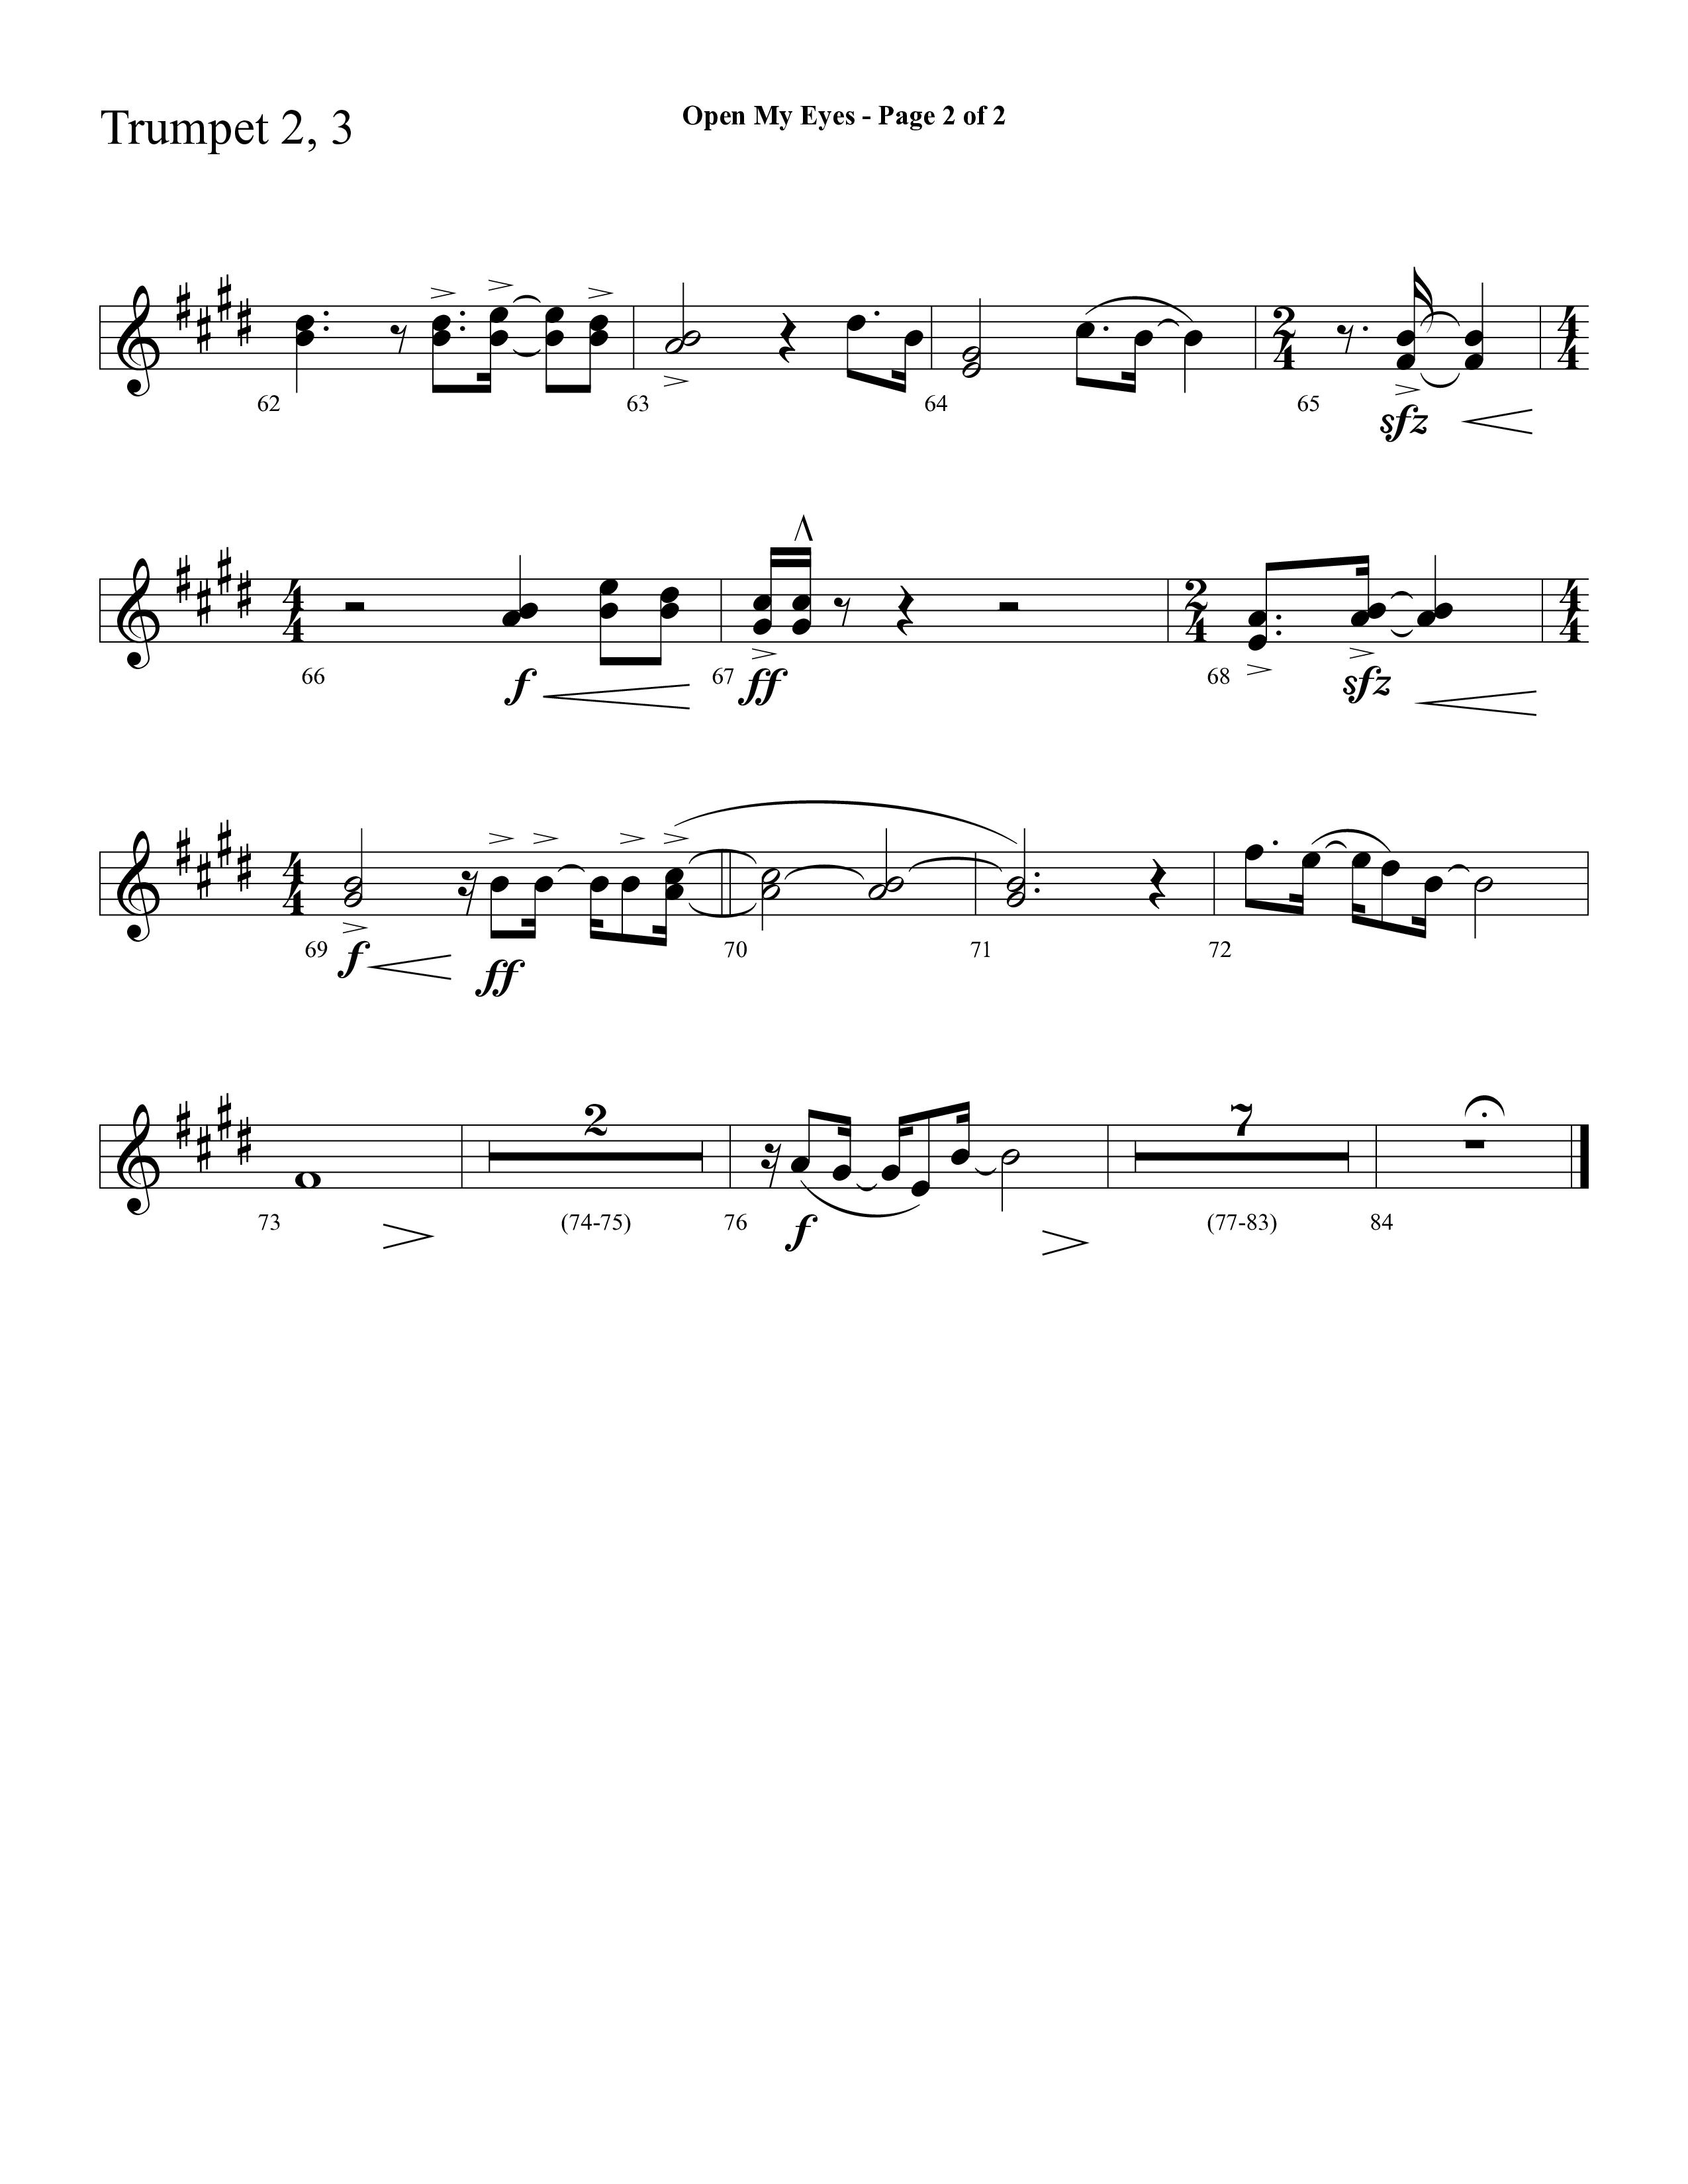 Open My Eyes (with Be Thou My Vision) (Choral Anthem SATB) Trumpet 2/3 (Arr. Cliff Duren / Lifeway Choral)